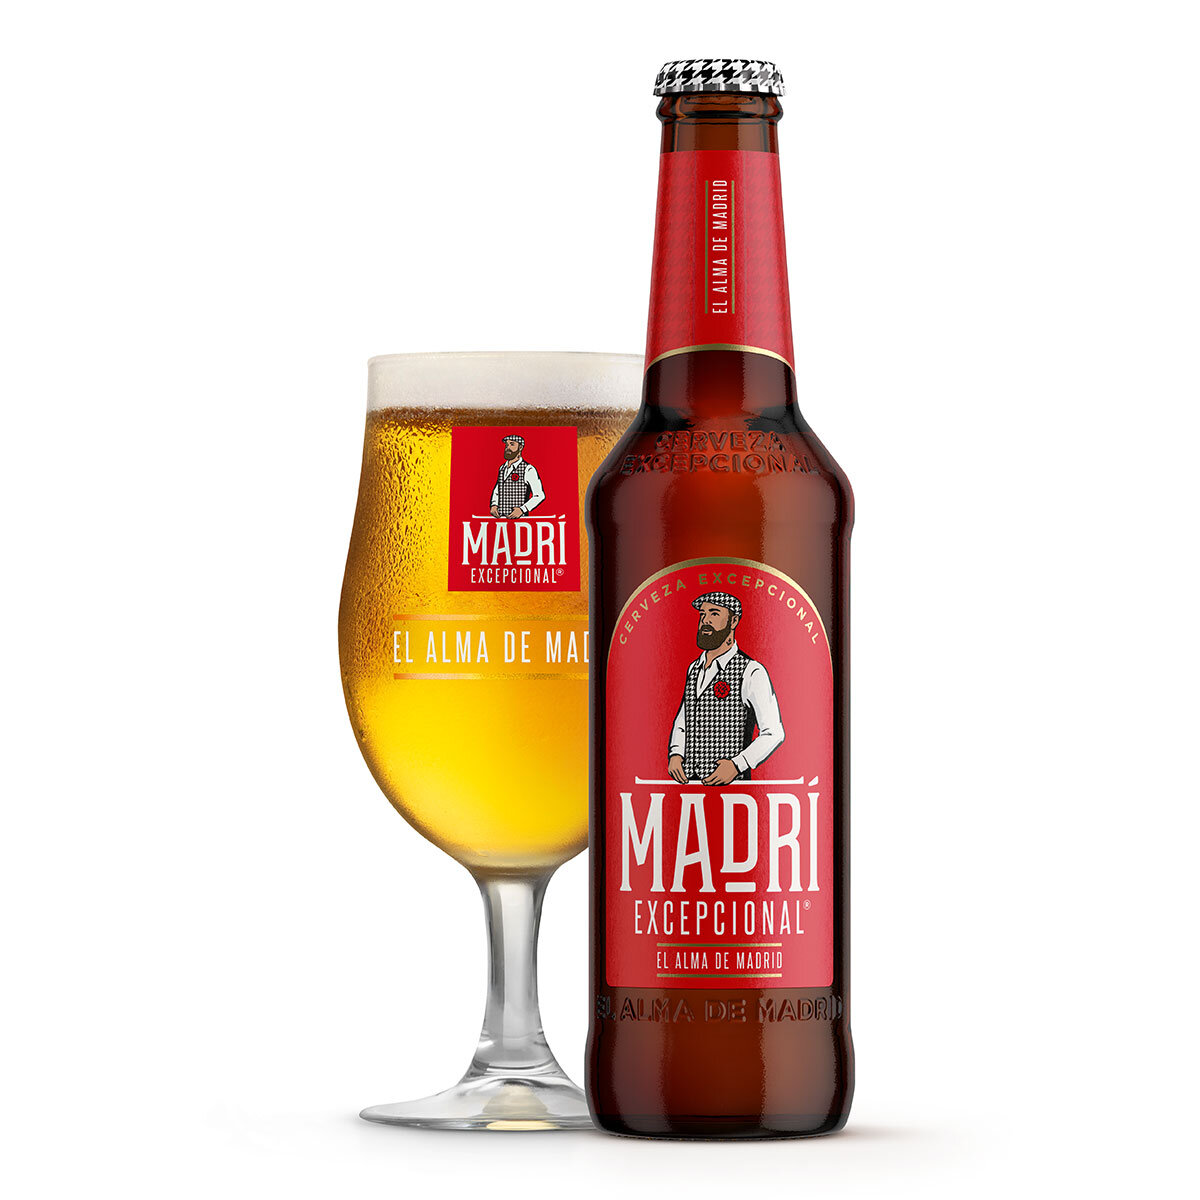 Madri Exceptional Premium Lager bottle with glass